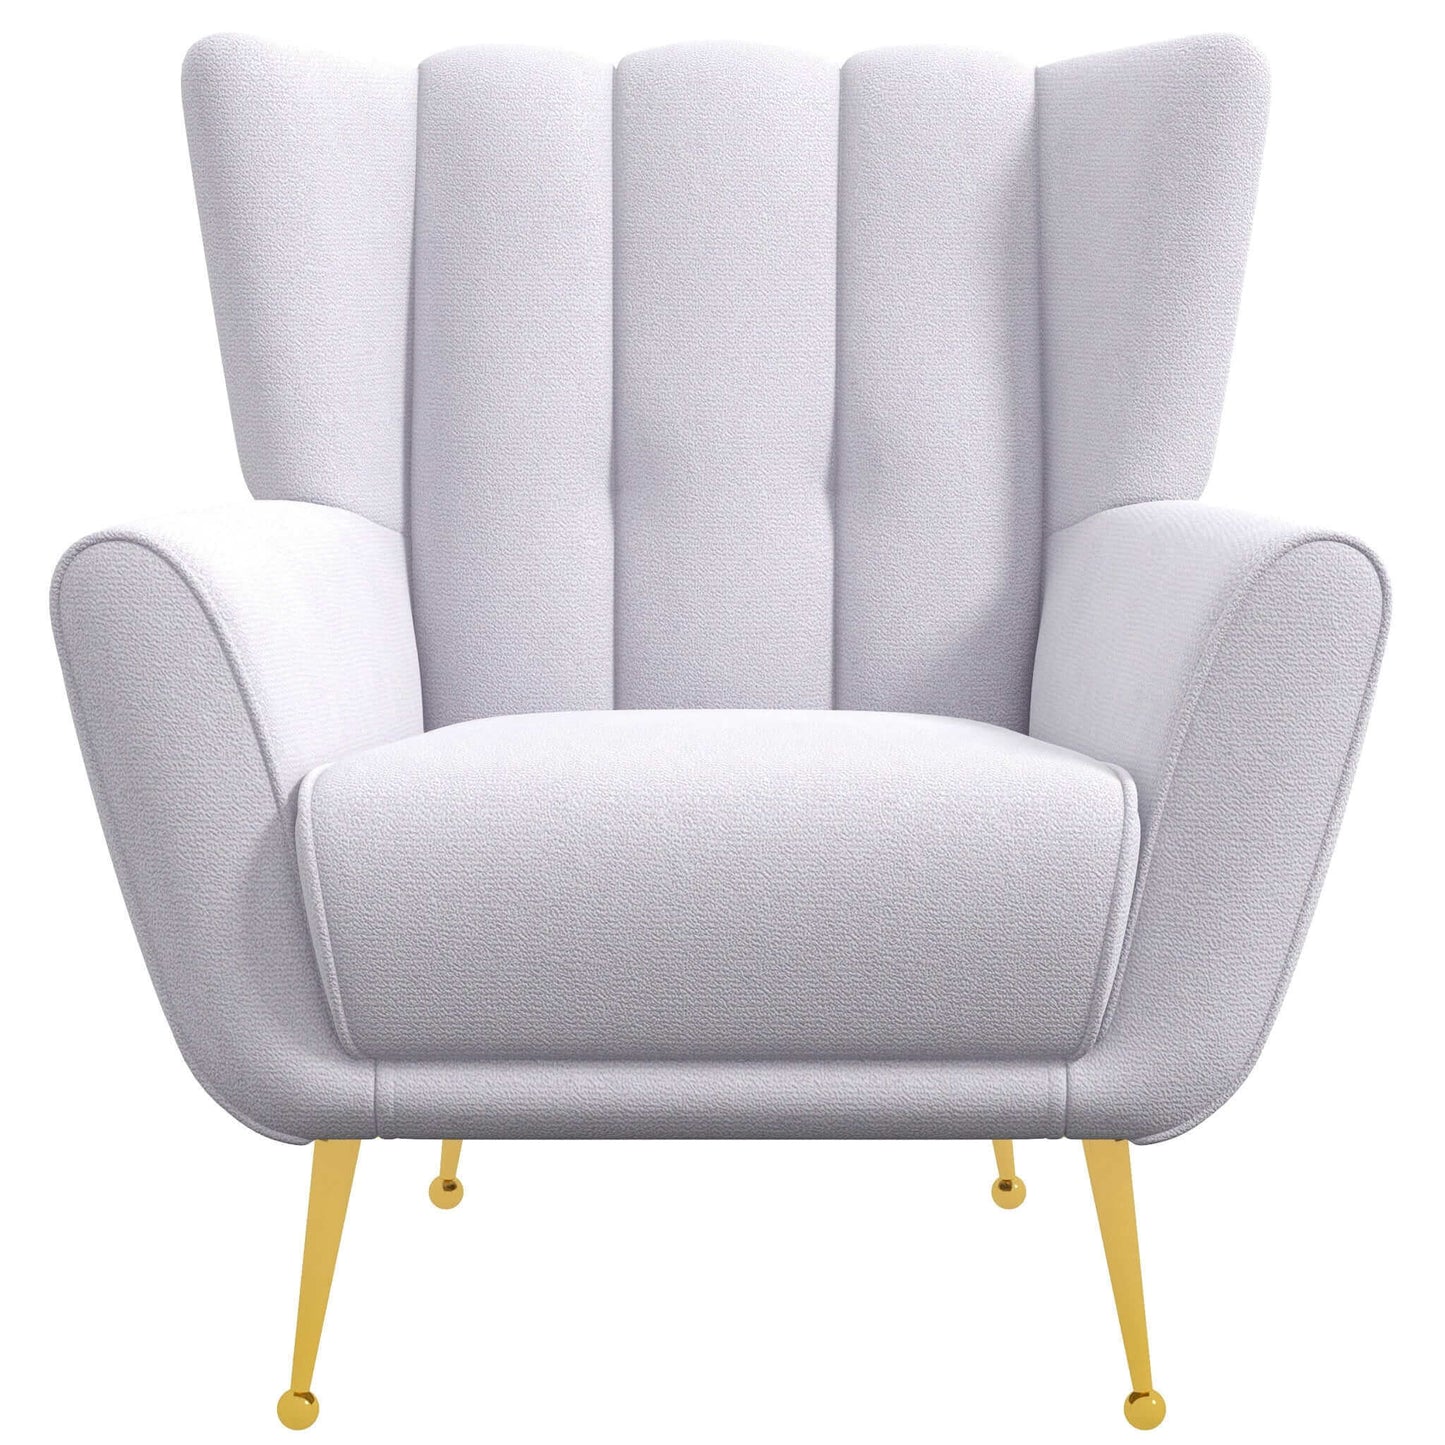 Ashcroft Furniture Co Lounge Chairs Light Grey Gianna Mid-Century Modern Tufted French Boucle Armchair